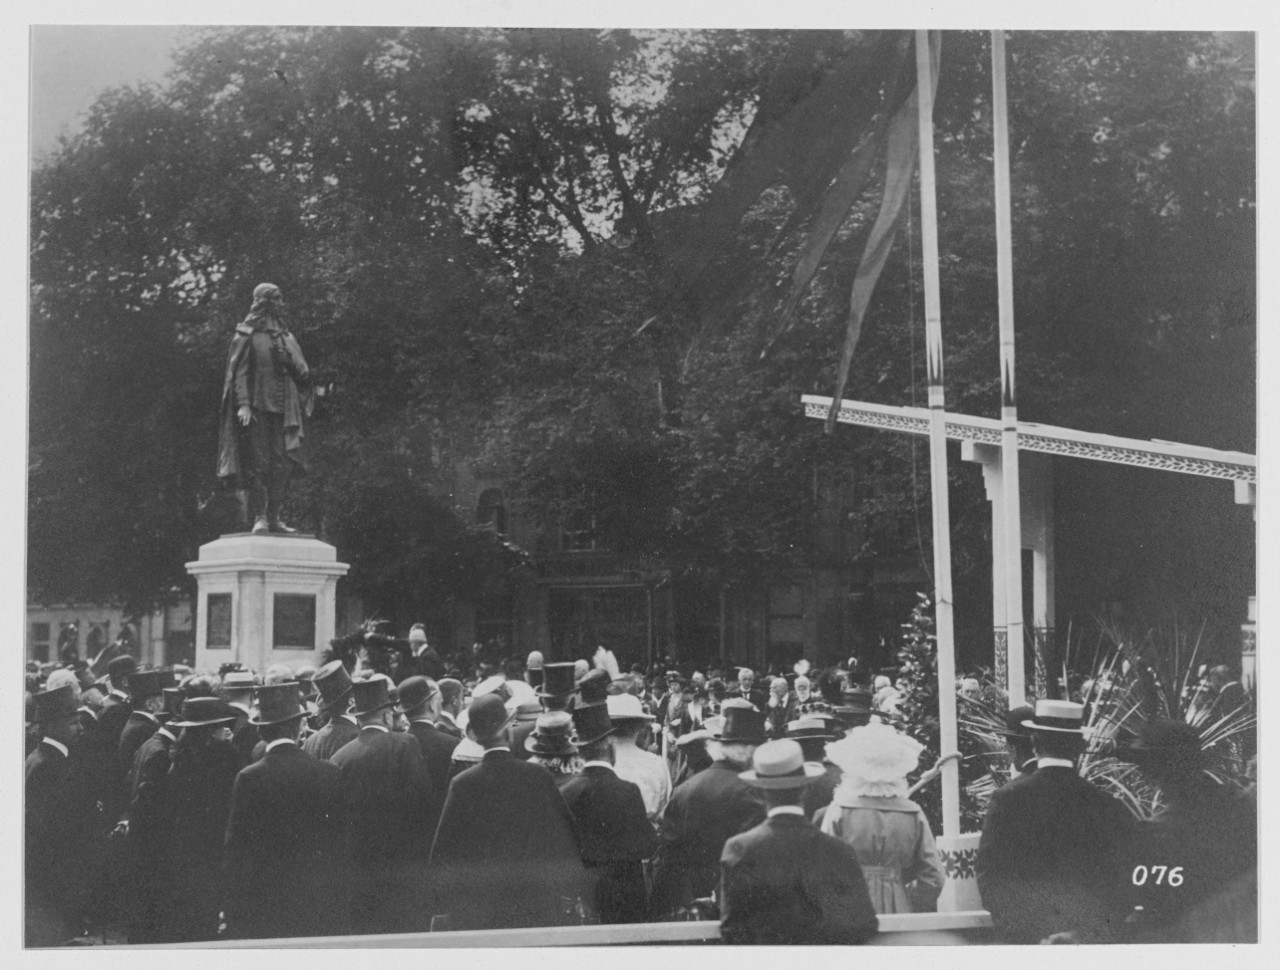 The unveiling of the monument.